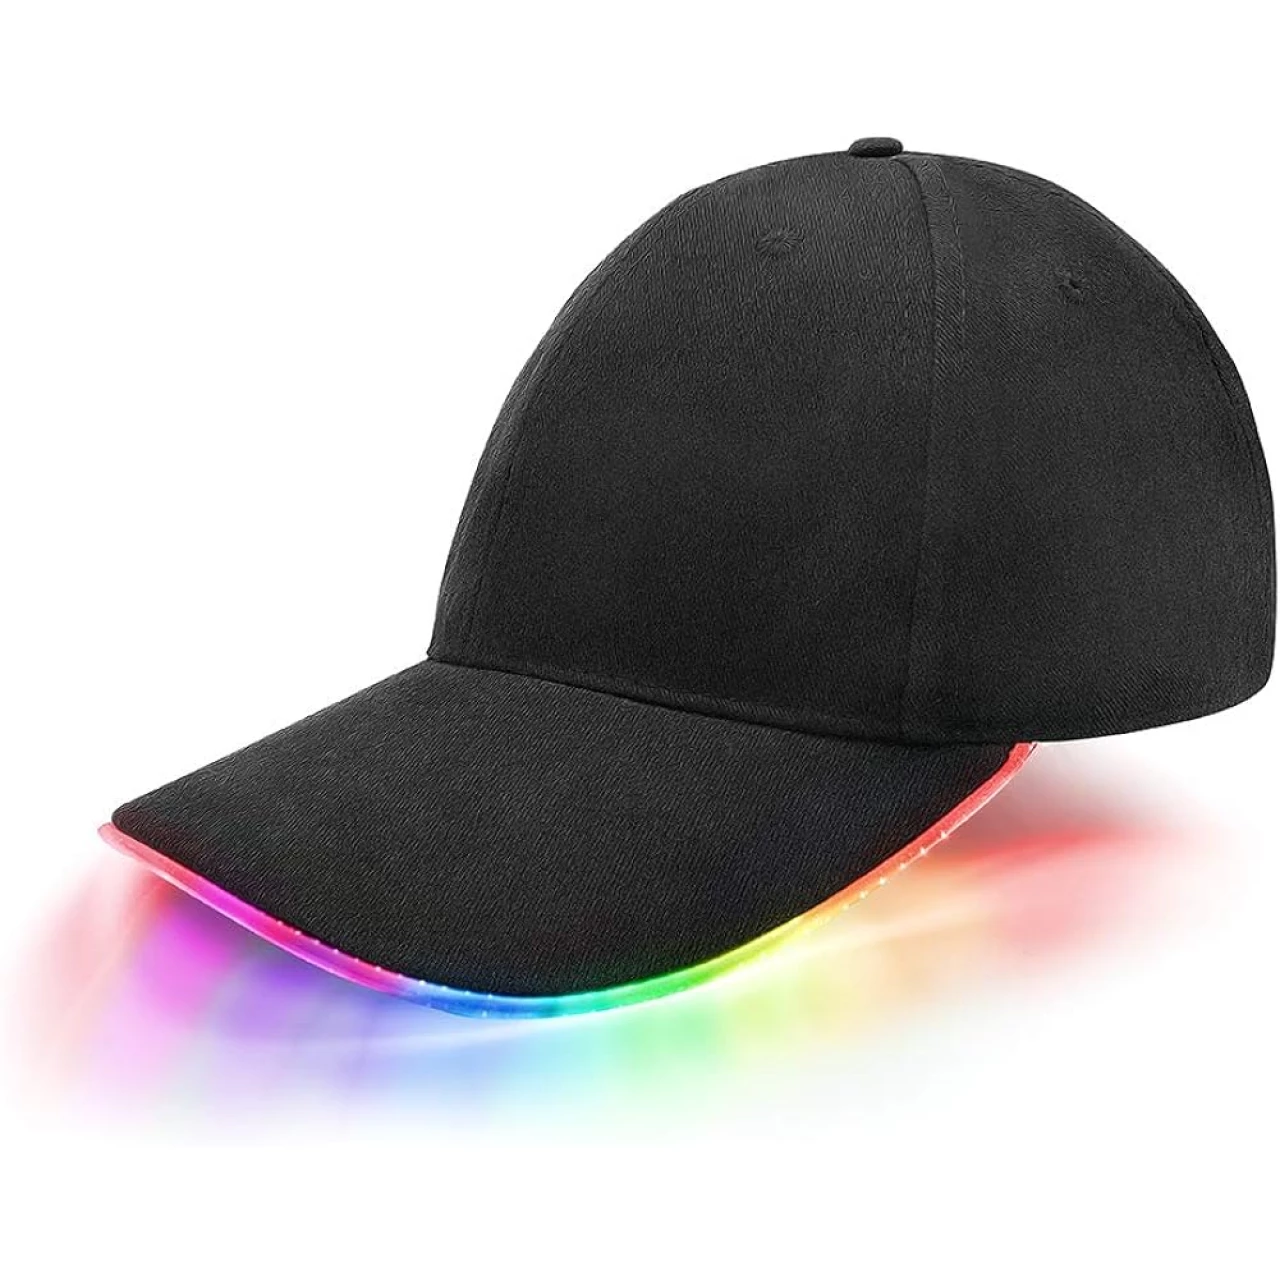 JIGUOOR LED Hat Light Up Baseball Cap Flash Glow Party Hat Rave Accessories for Festival Club Stage Hip-hop Performance